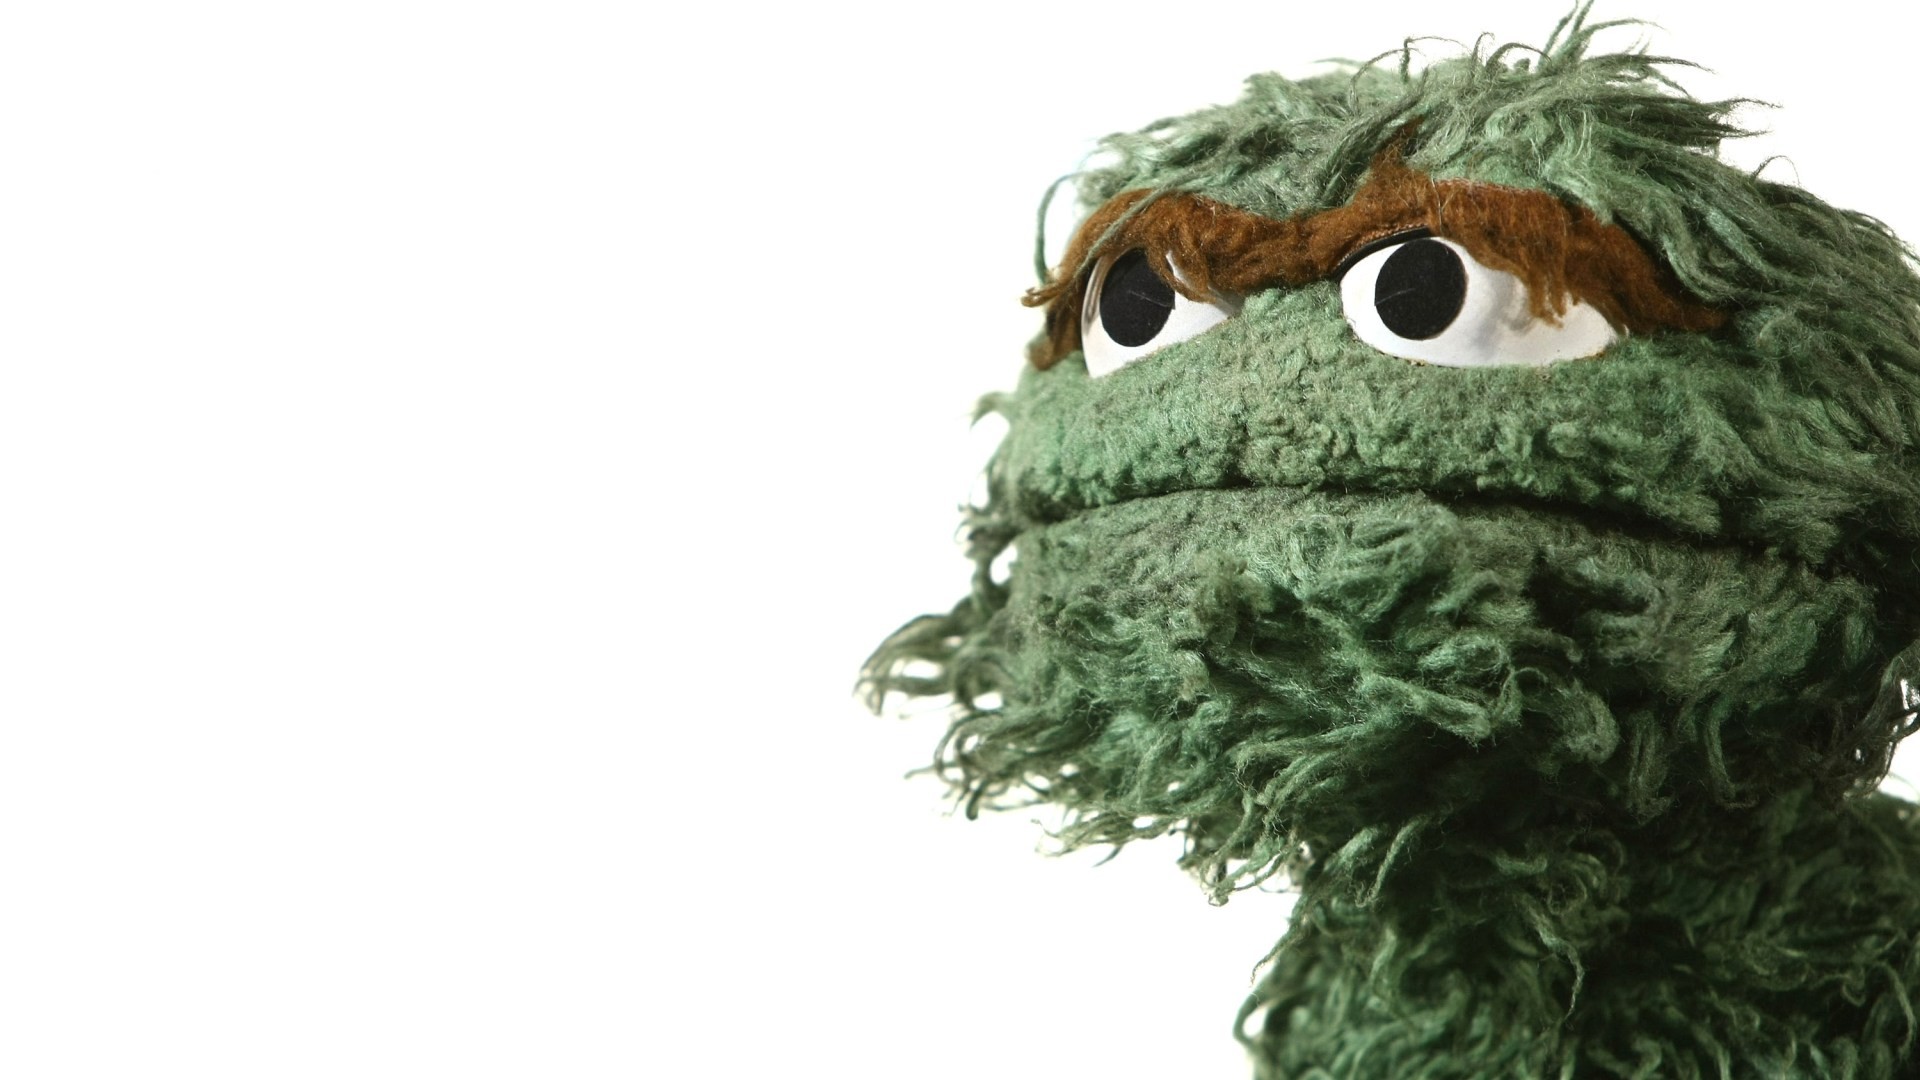 General 1920x1080 Oscar The Grouch white background simple background